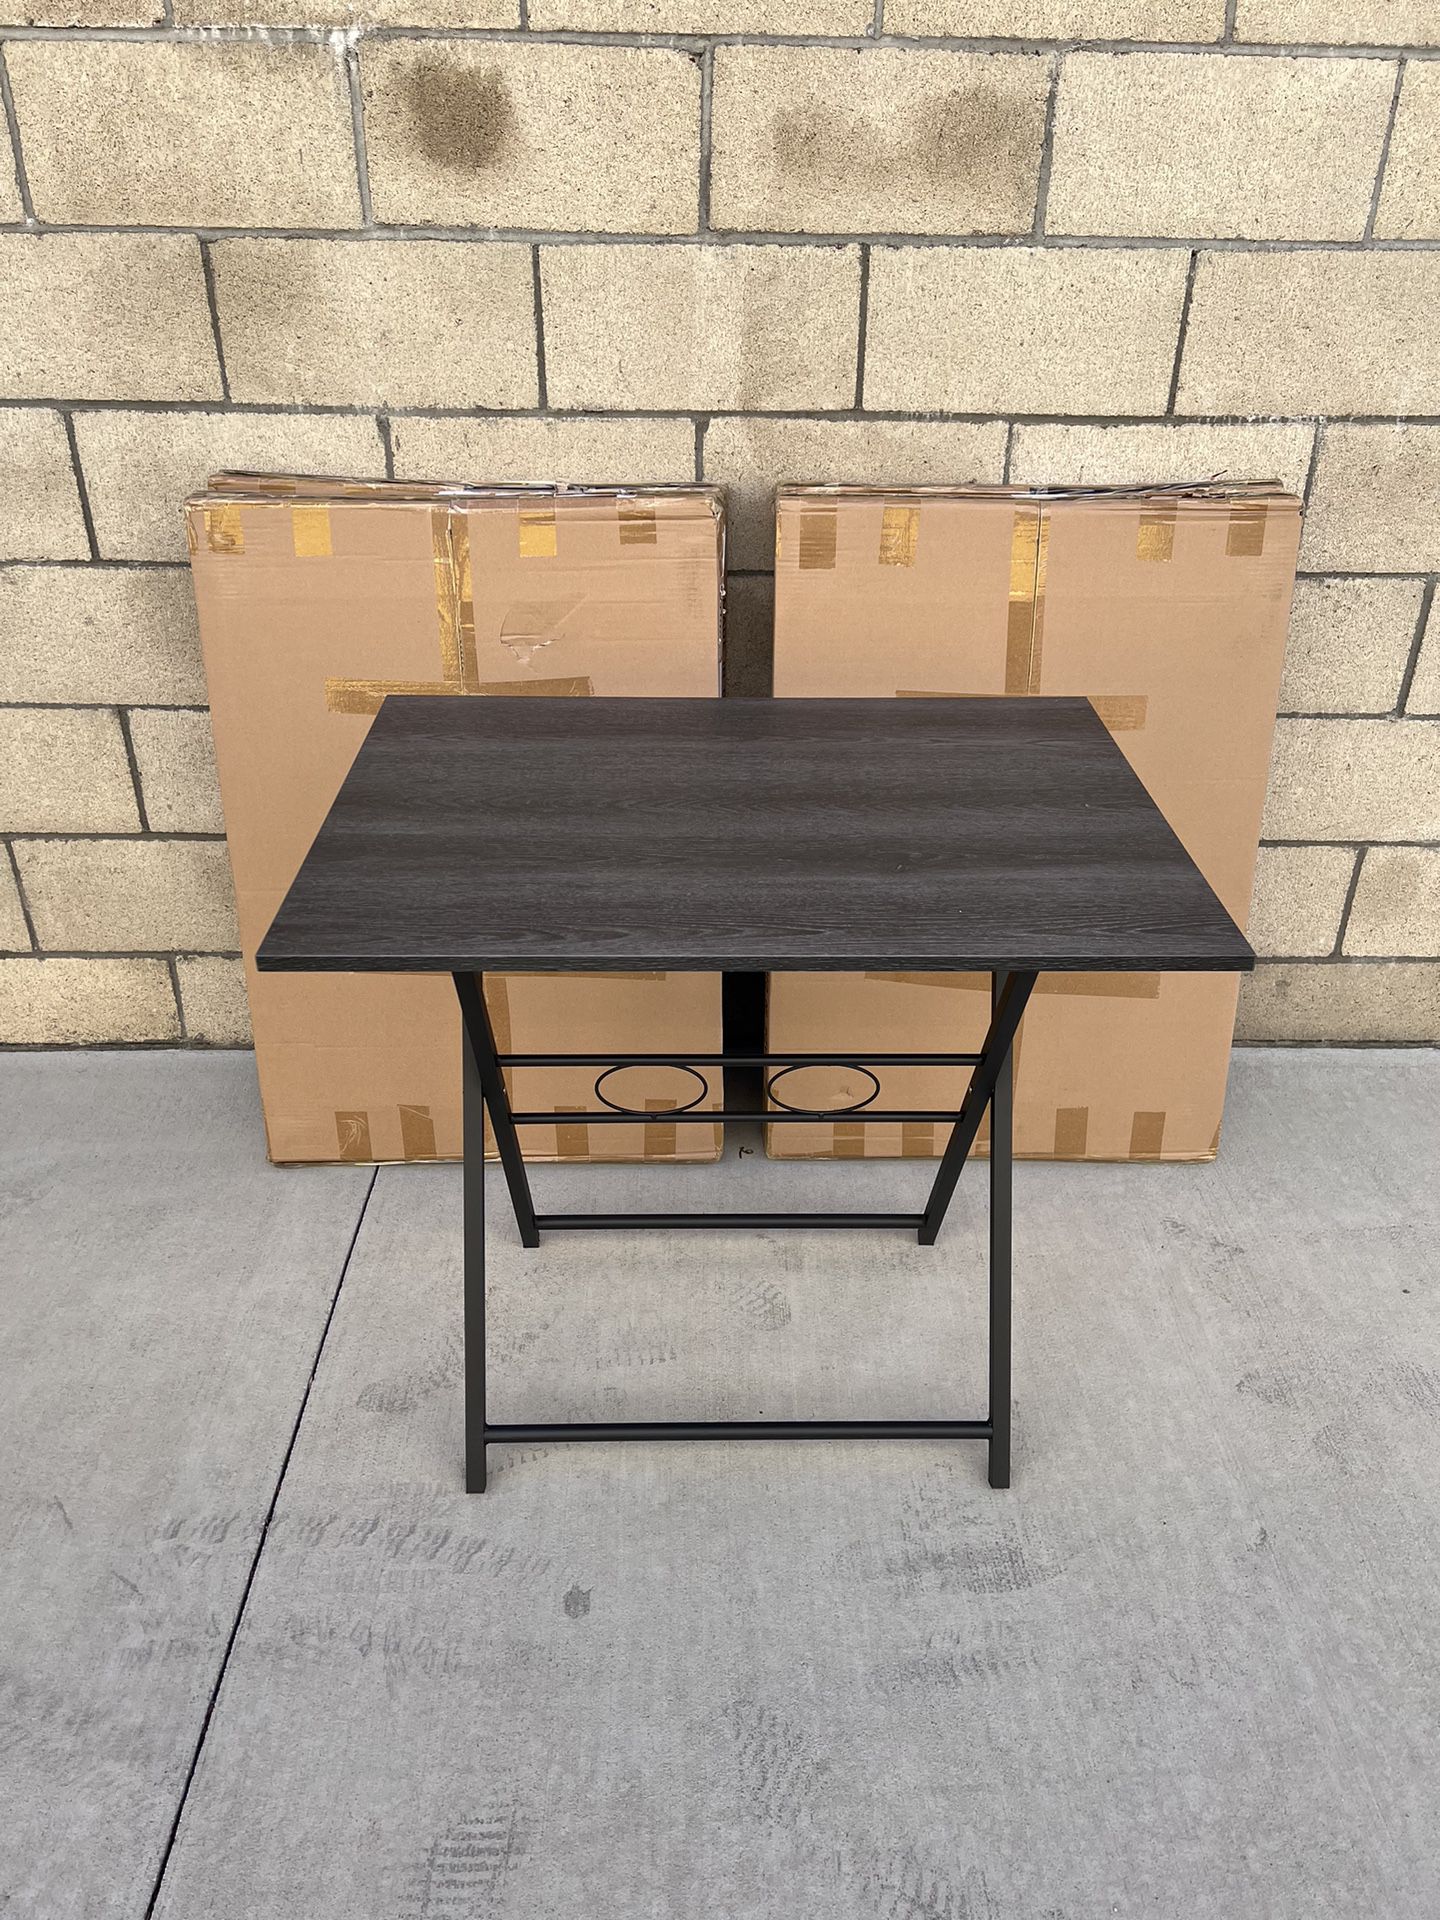 NEW 31.5" Foldable Computer Desk, Small Office Desk, Home Office, Study Writing Desk, Collapsible Desk Workstation **$25ea, FIRM**